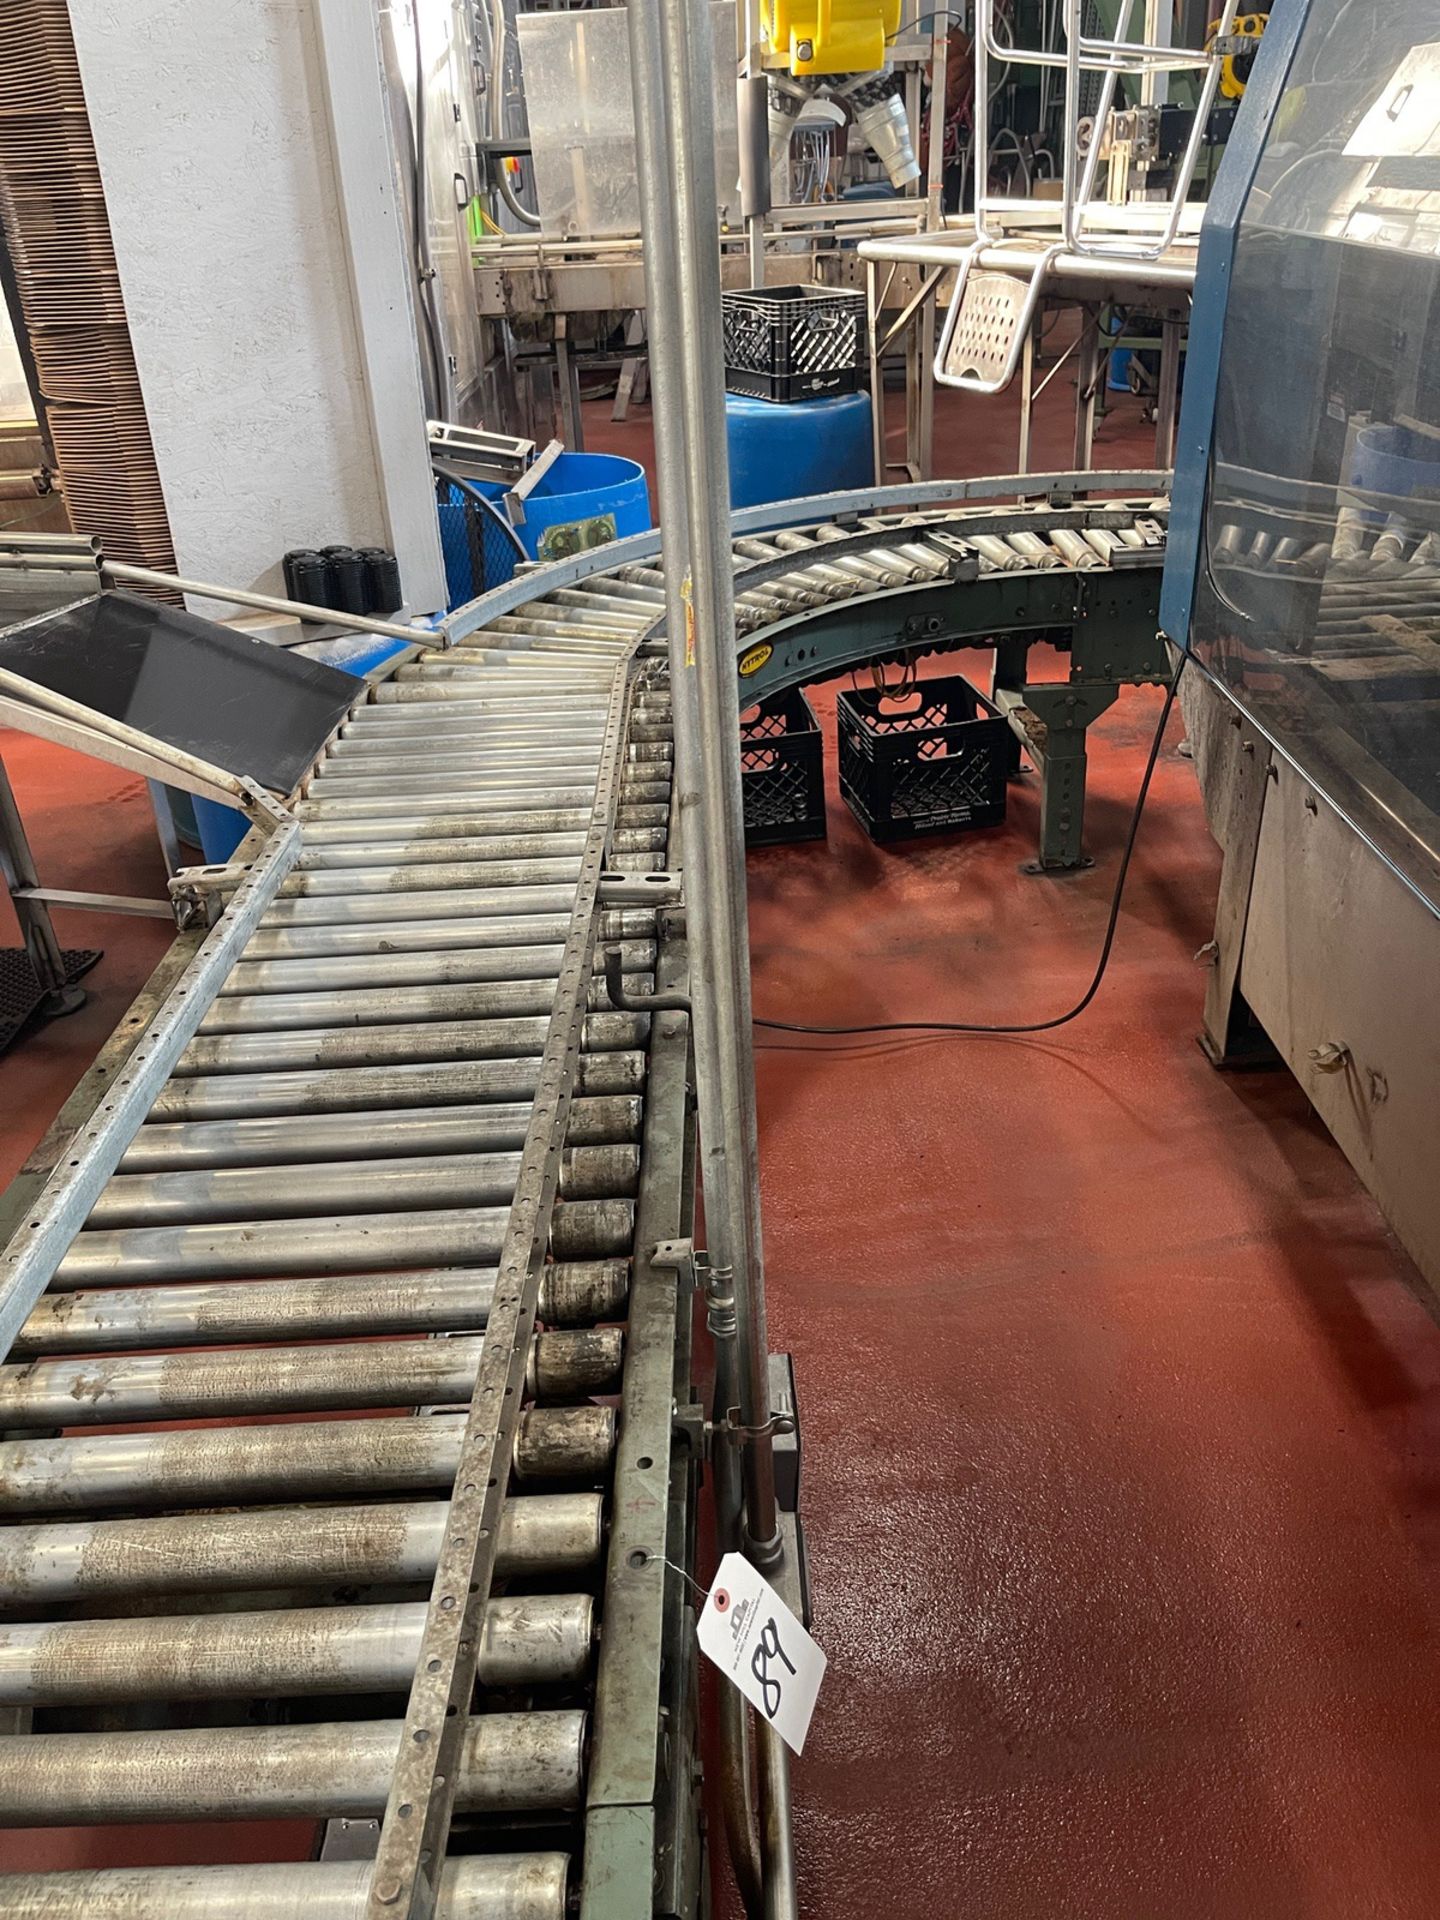 Hytrol Steel Roller Case Conveyor with J shaped Curve, Approx. 14' run and 21" wide | Rig Fee $250 - Image 3 of 4